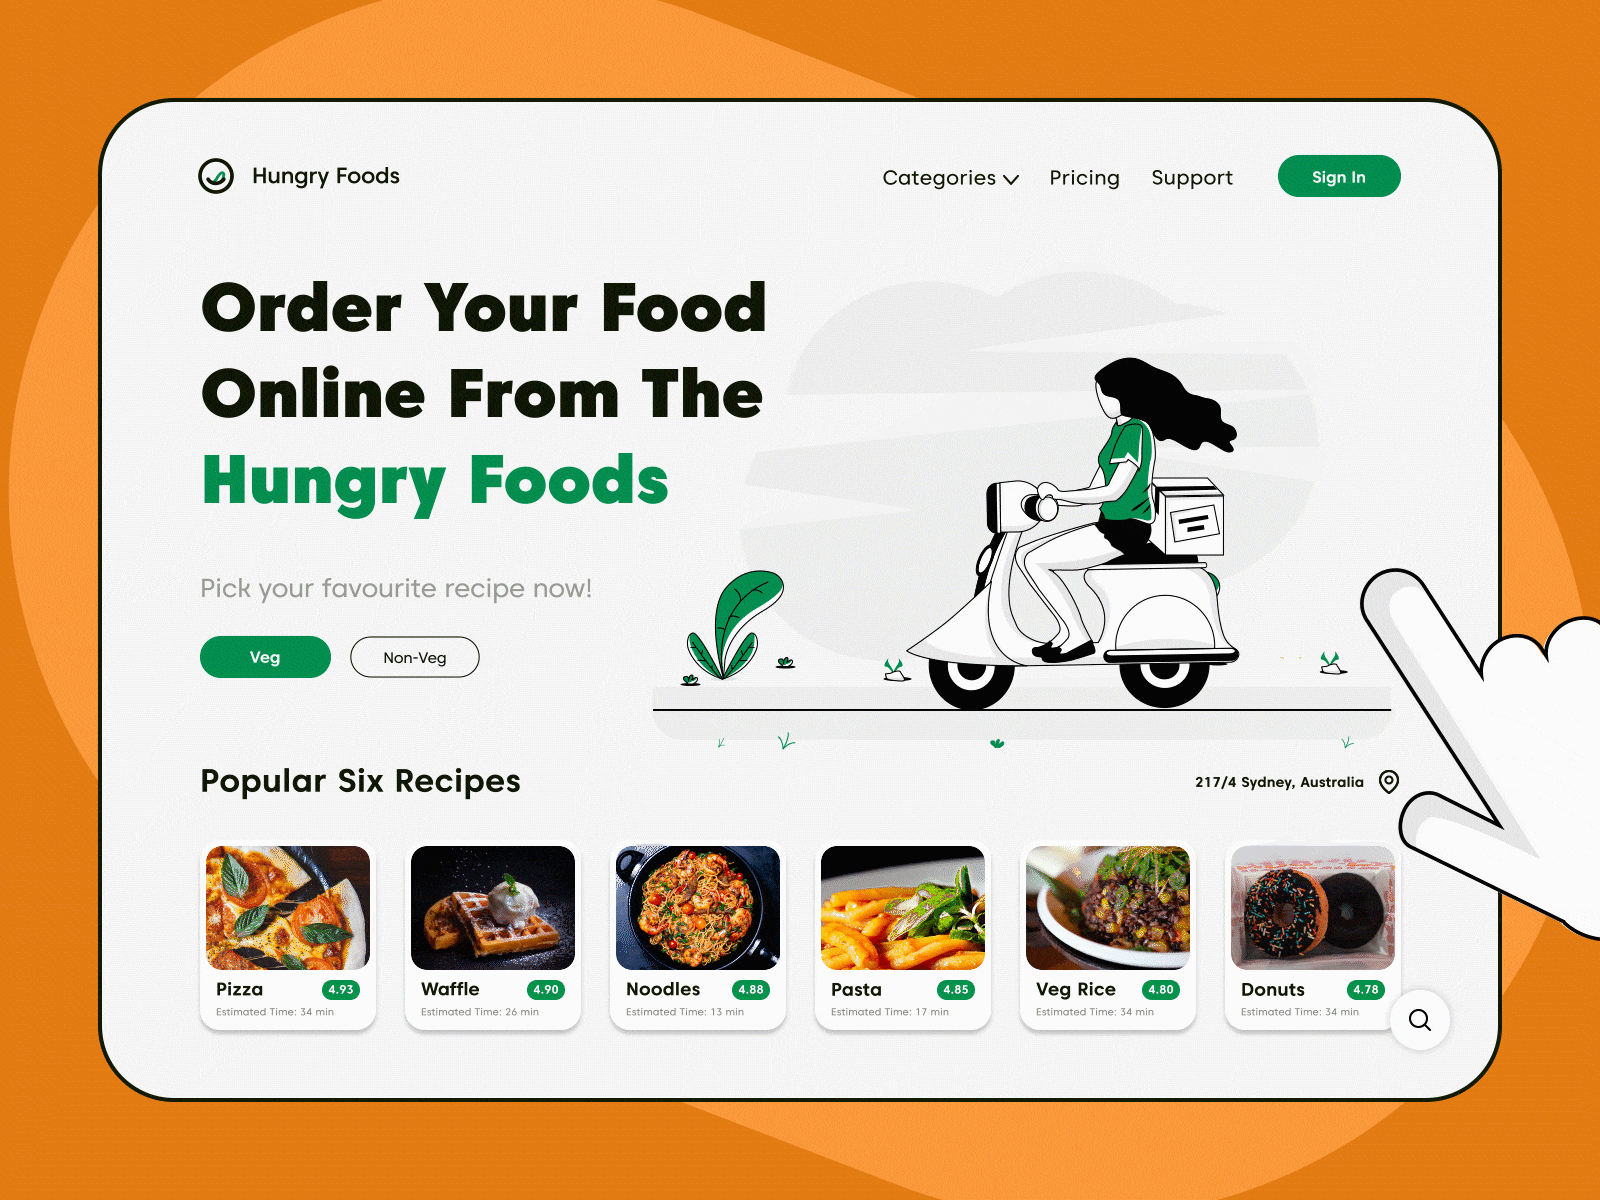 Food Delivery Application P1 animation app interaction application design food and drink food app food delivery food delivery app food delivery application food illustration interaction interaction design interactive interactive design latest trend motion graphic ui ui interaction ui interactive ux